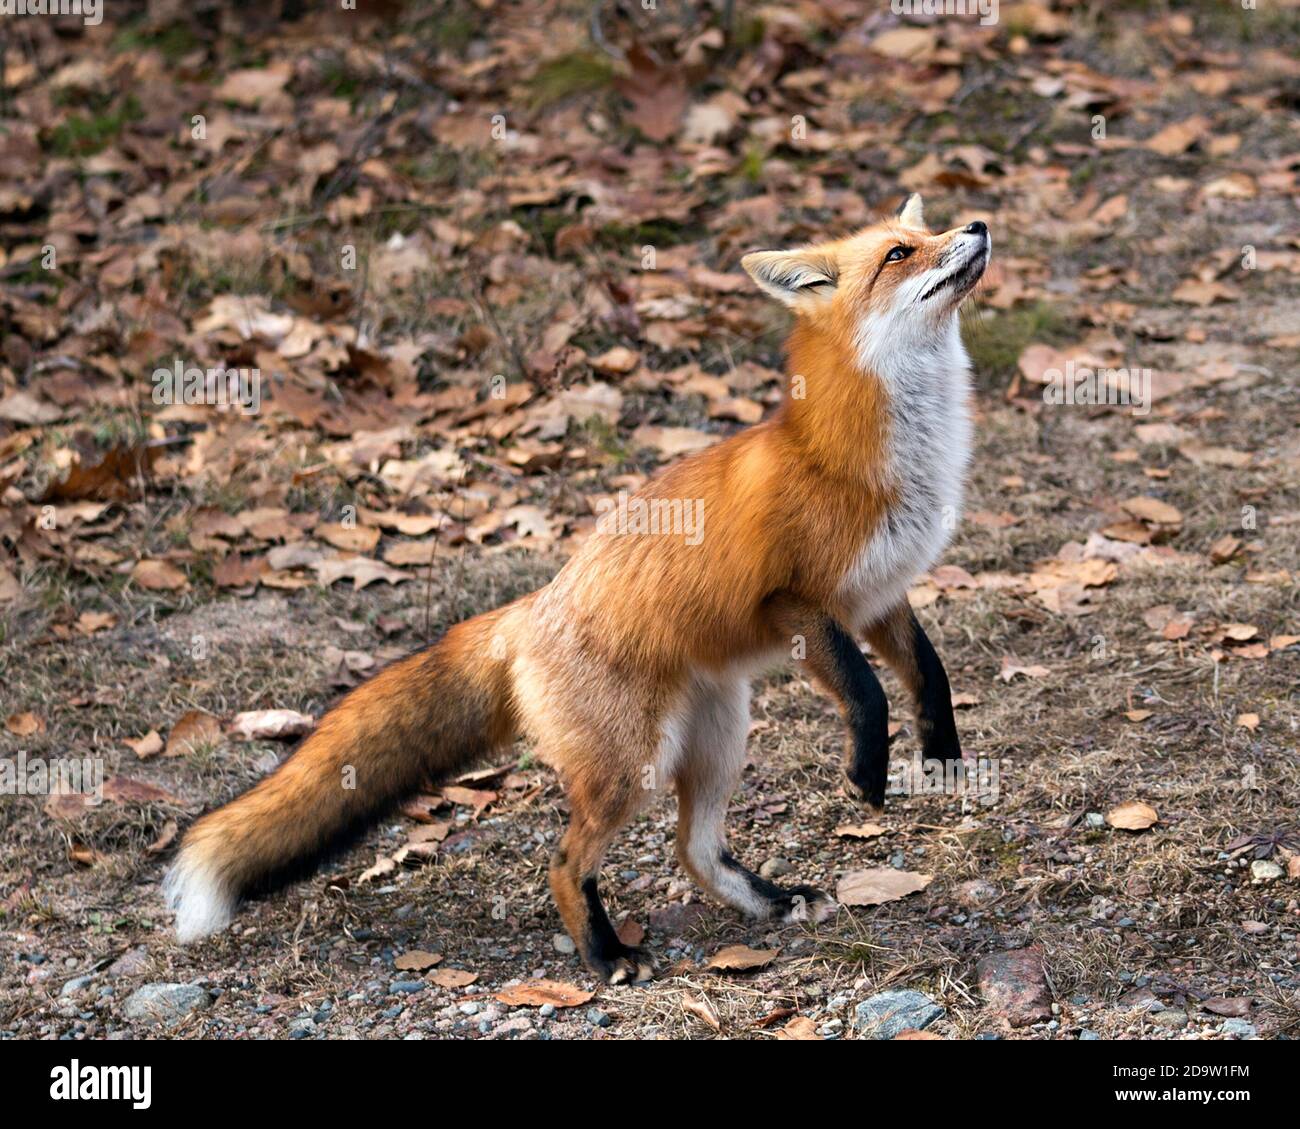 Red Fox close-up standing on back legs with a moss and autumn brown leaves background in its environment and habitat, displaying fox tail, fox fur. Fo Stock Photo